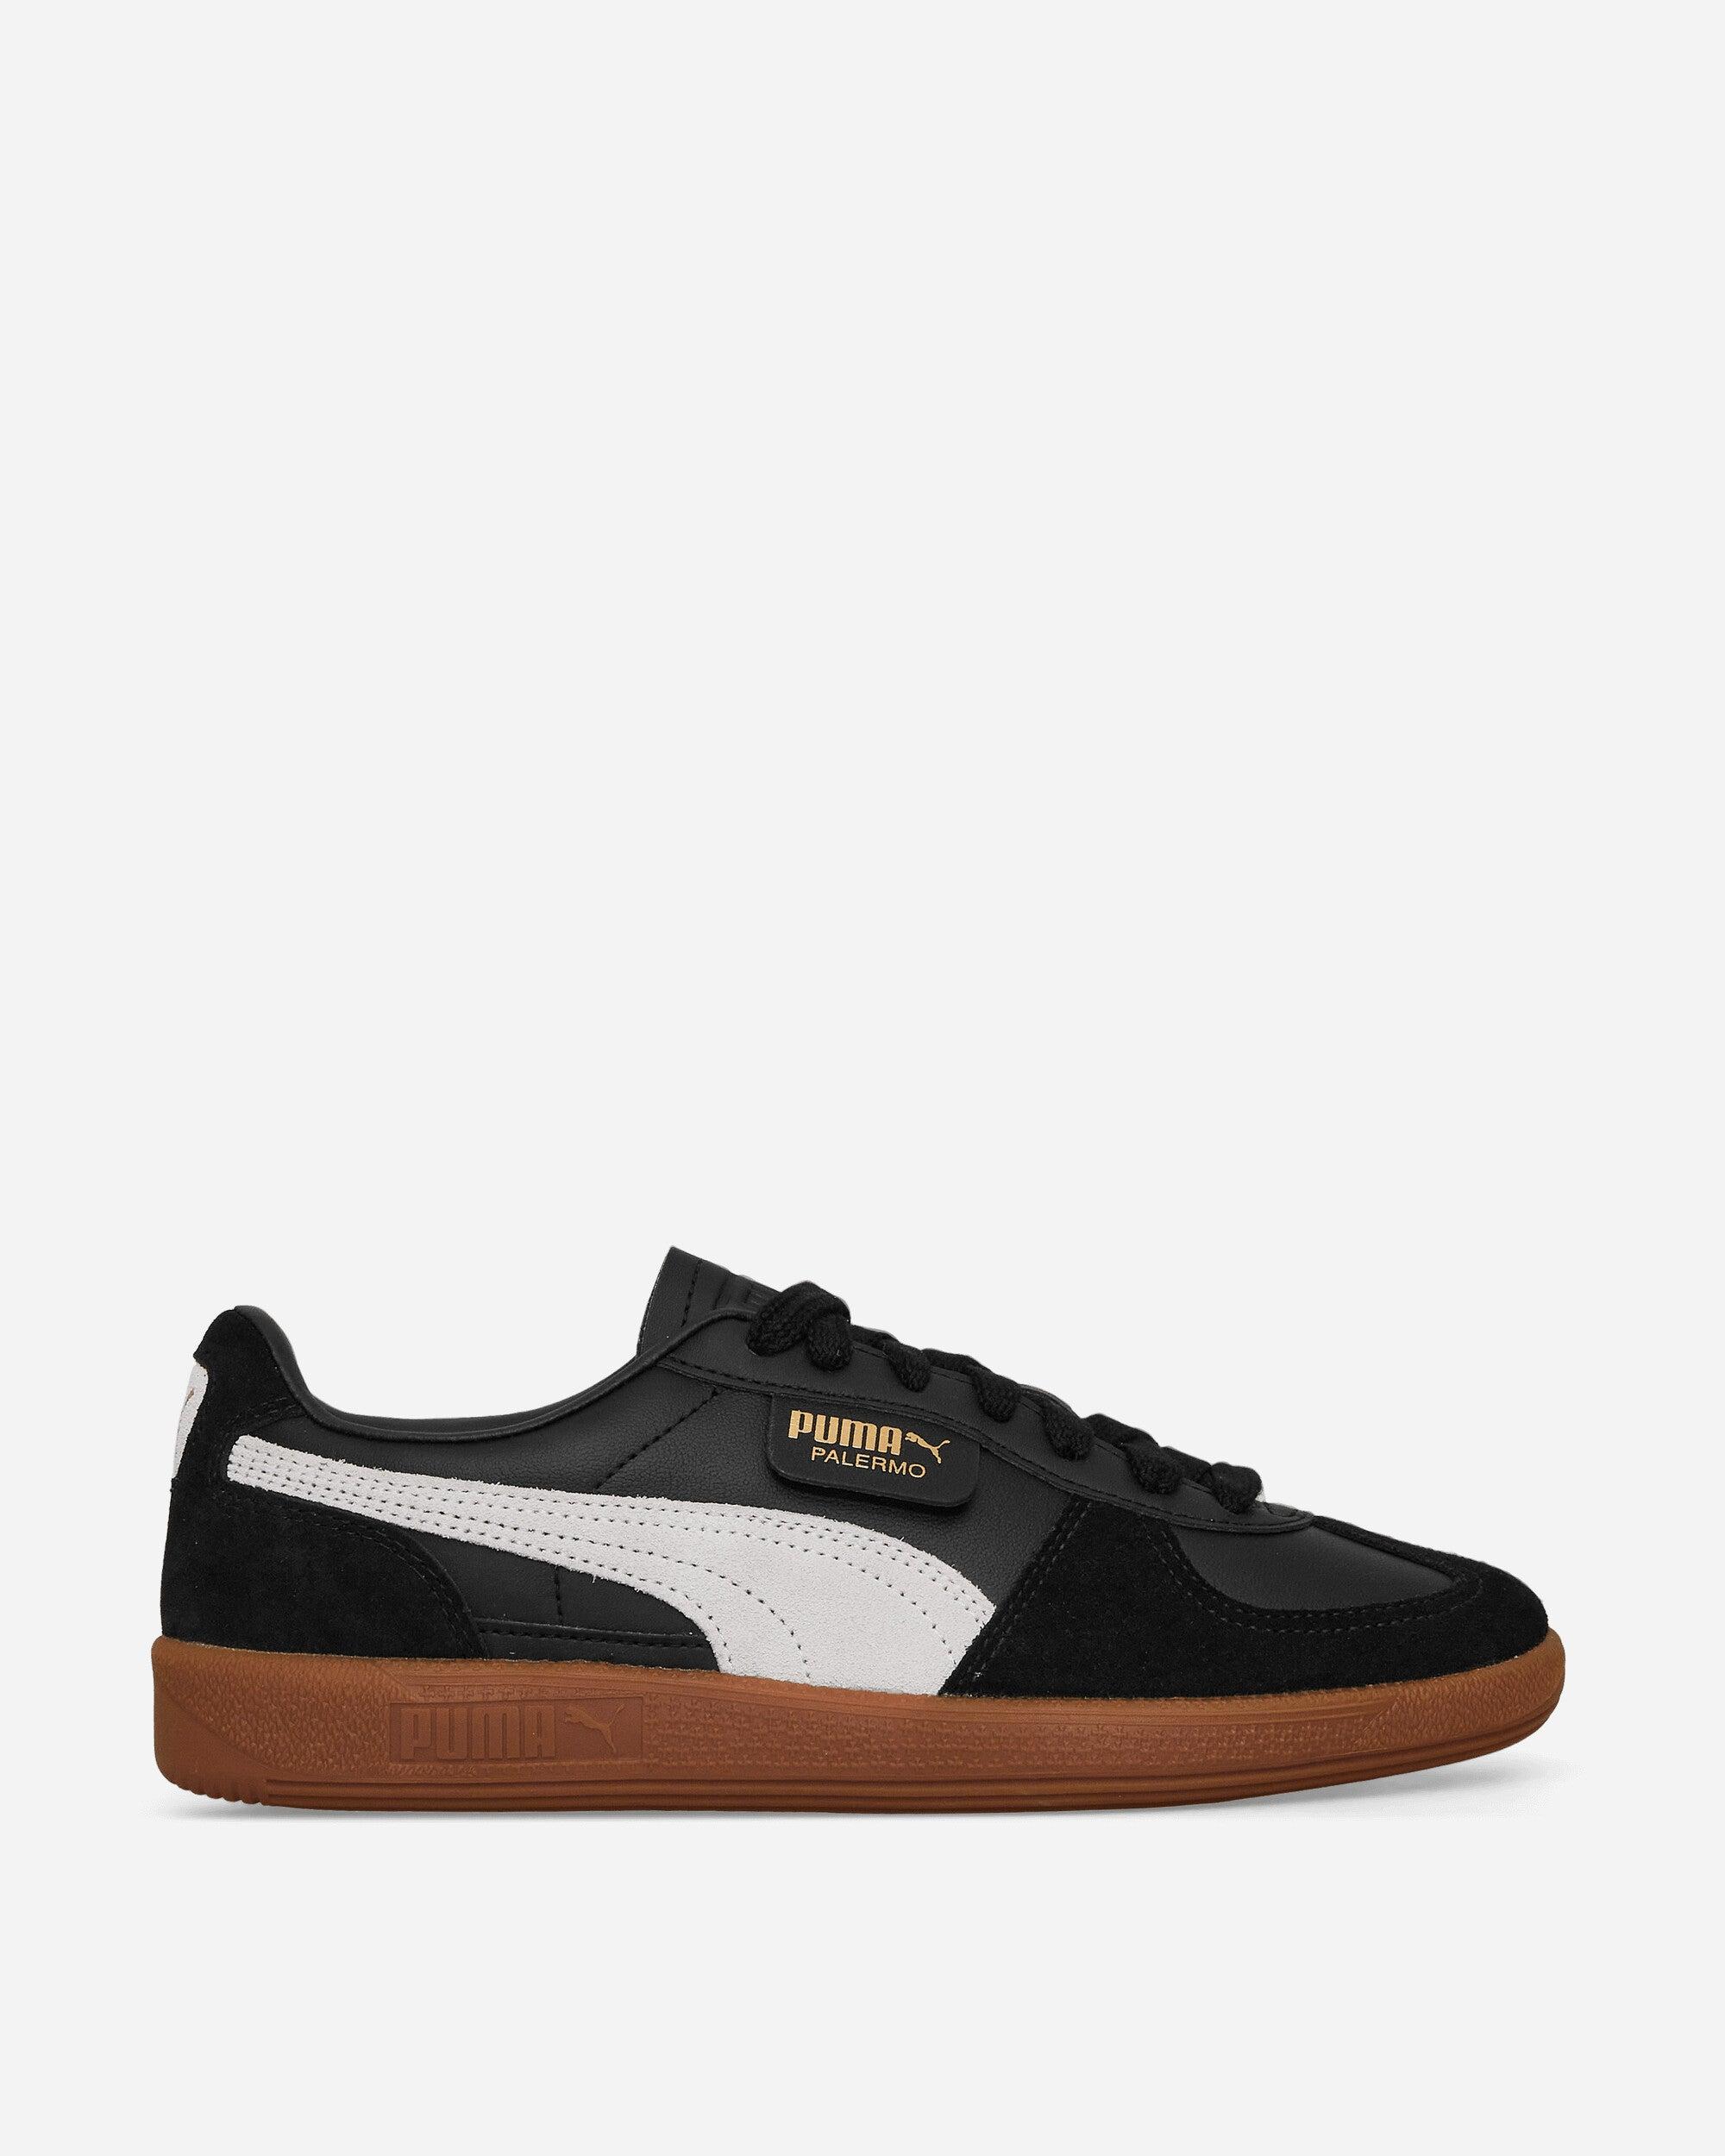 Puma Leather SLIPSTREAM Sneakers With Contrasting Details unisex men women  - Glamood Outlet